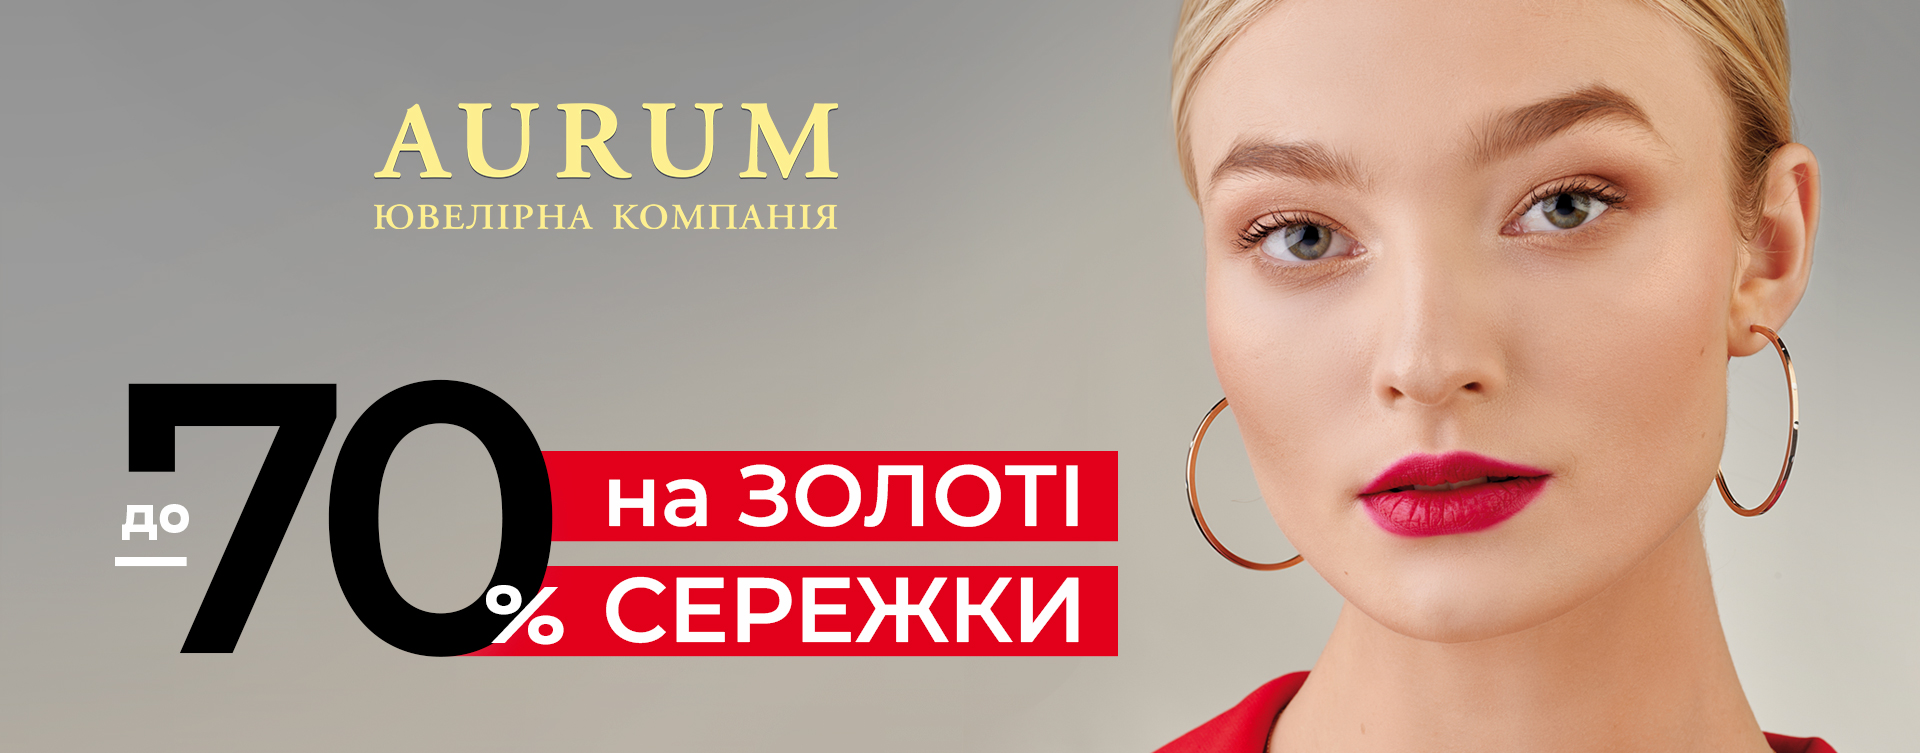 Up to 70% off gold earrings at AURUM